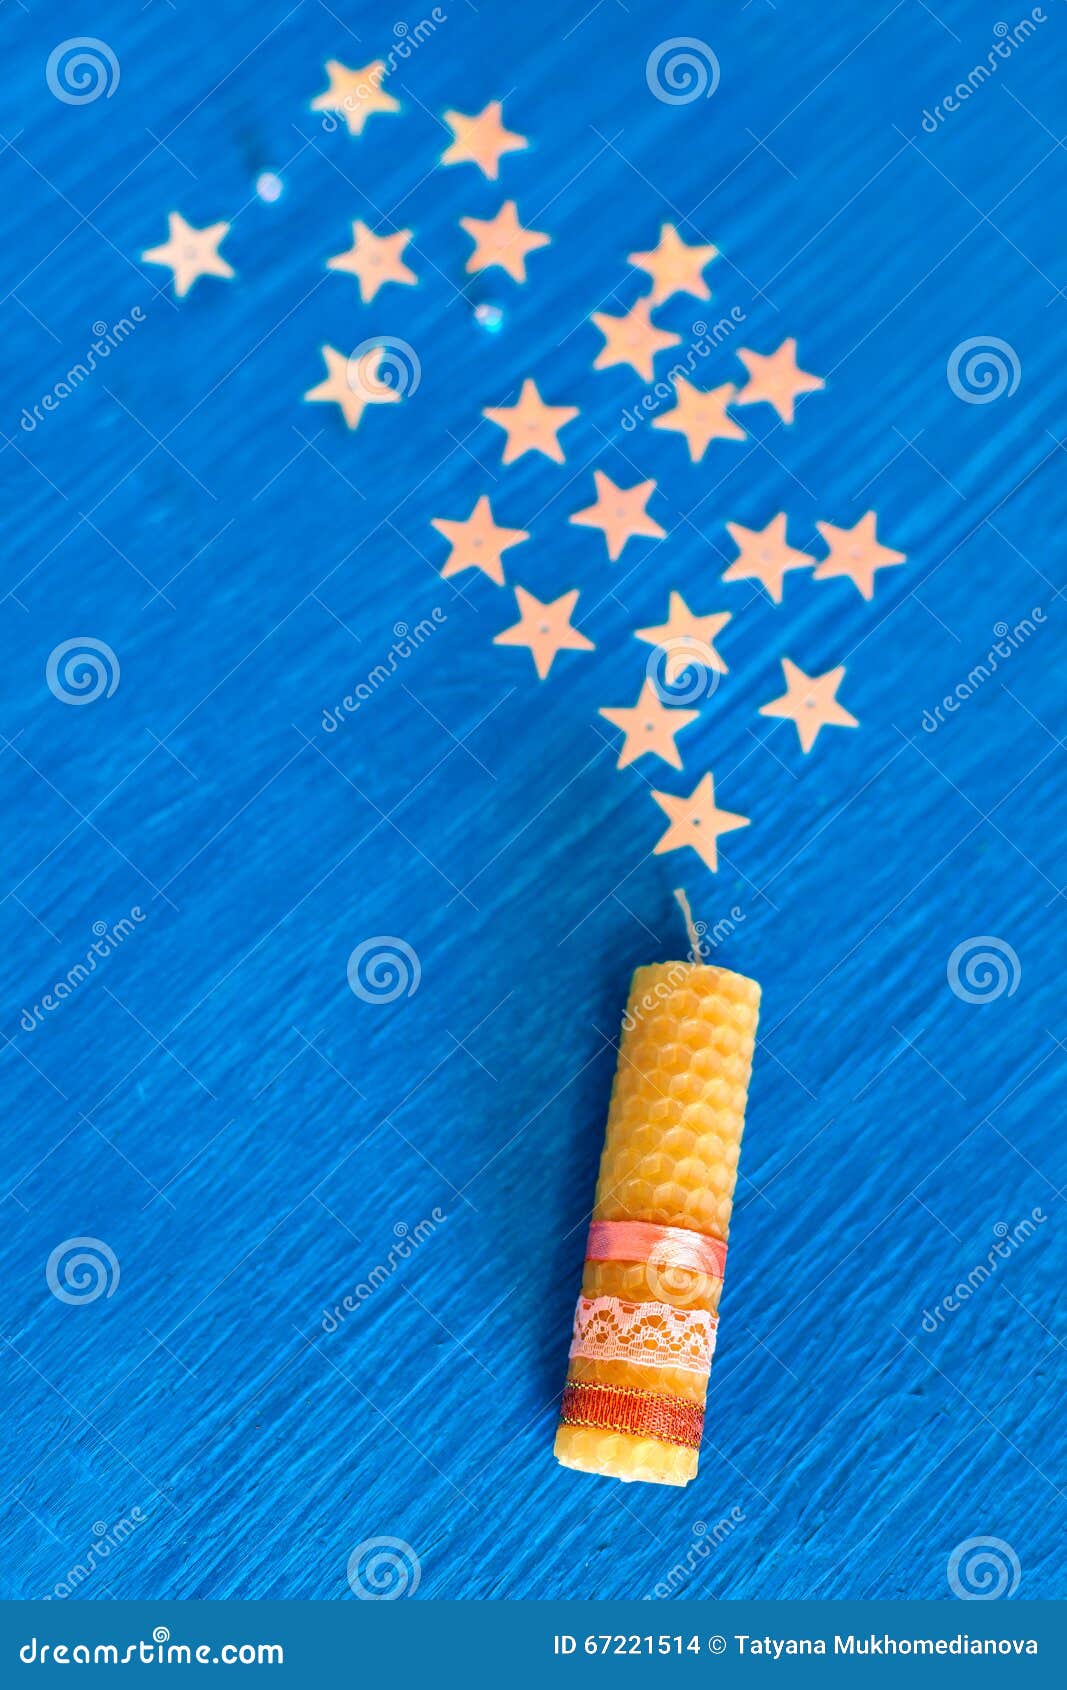 Touching Song Of The Candles Stock Photo Image Of Trim Handmade